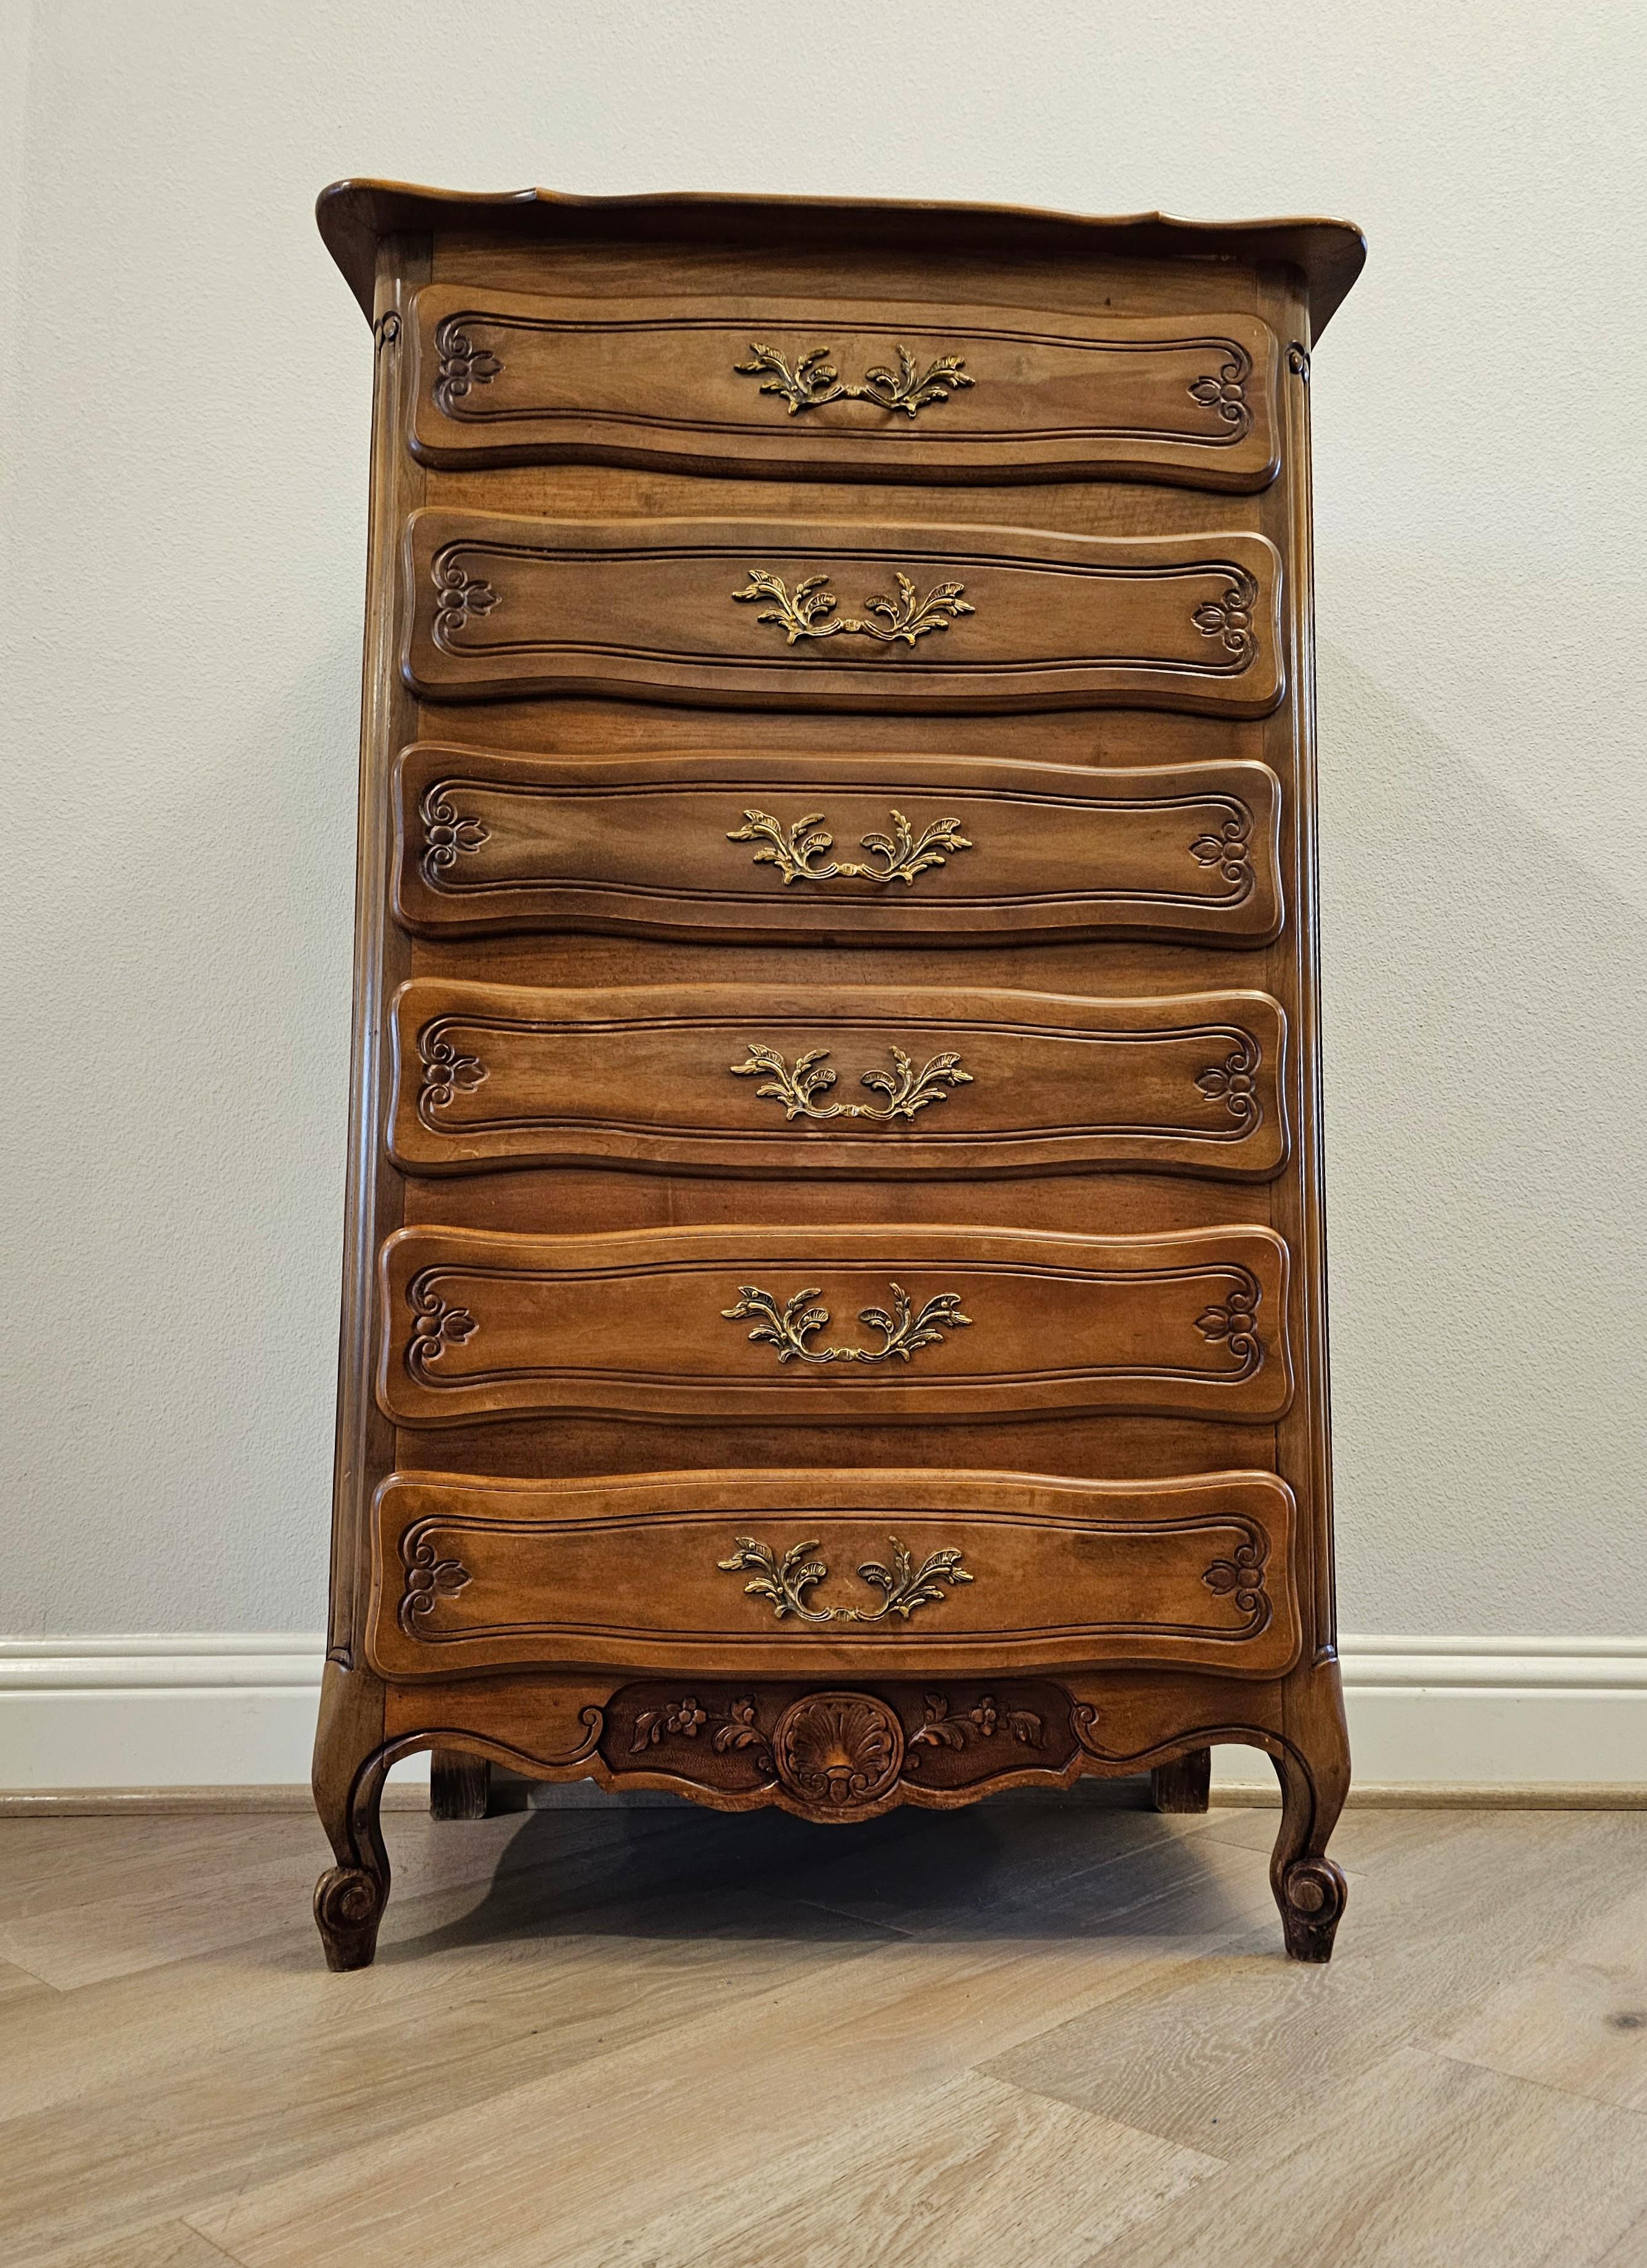 A vintage French Provincial walnut and oak semainier chest of drawers.

Handcrafted in France in the Mid-20th Century, high quality solid wood construction, finished in elegantly sophisticated Louis XV taste, having a stunning matched parquetry